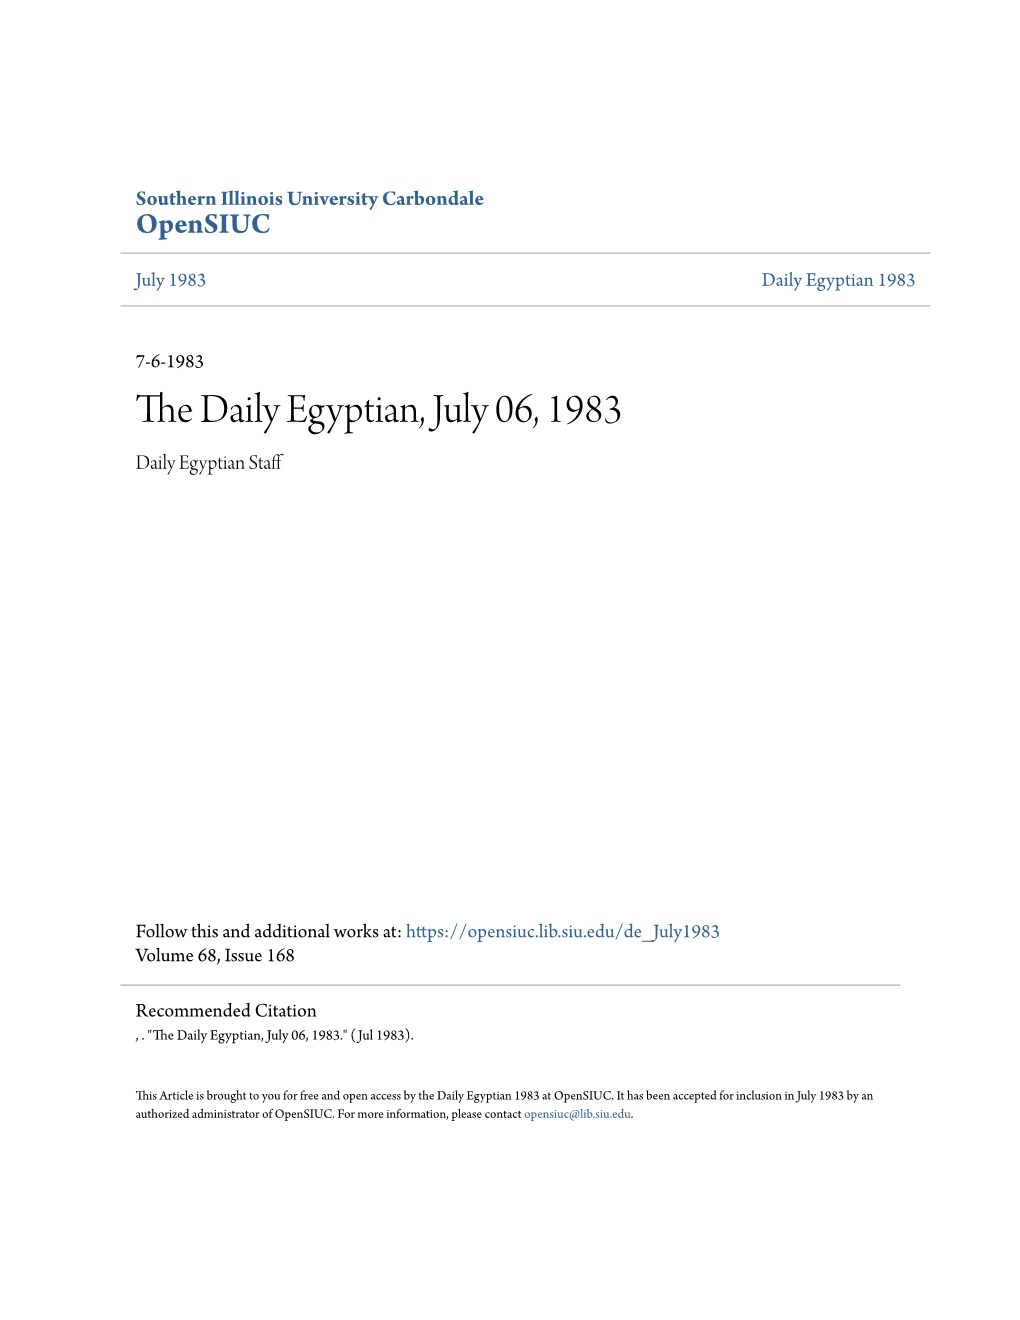 The Daily Egyptian, July 06, 1983